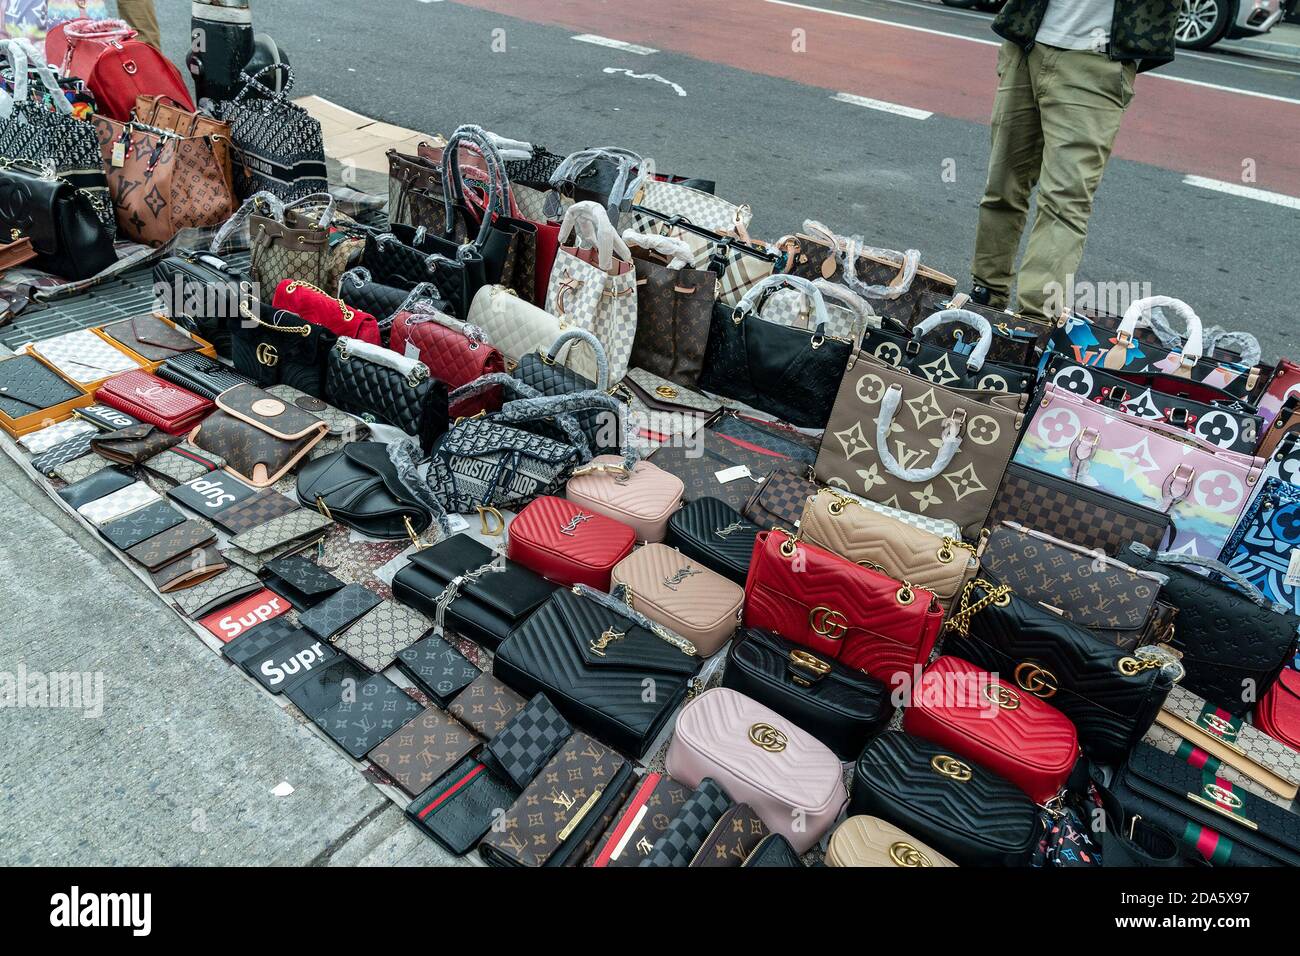 Bag, shoe counterfeiters back in force on NYC's Canal Street